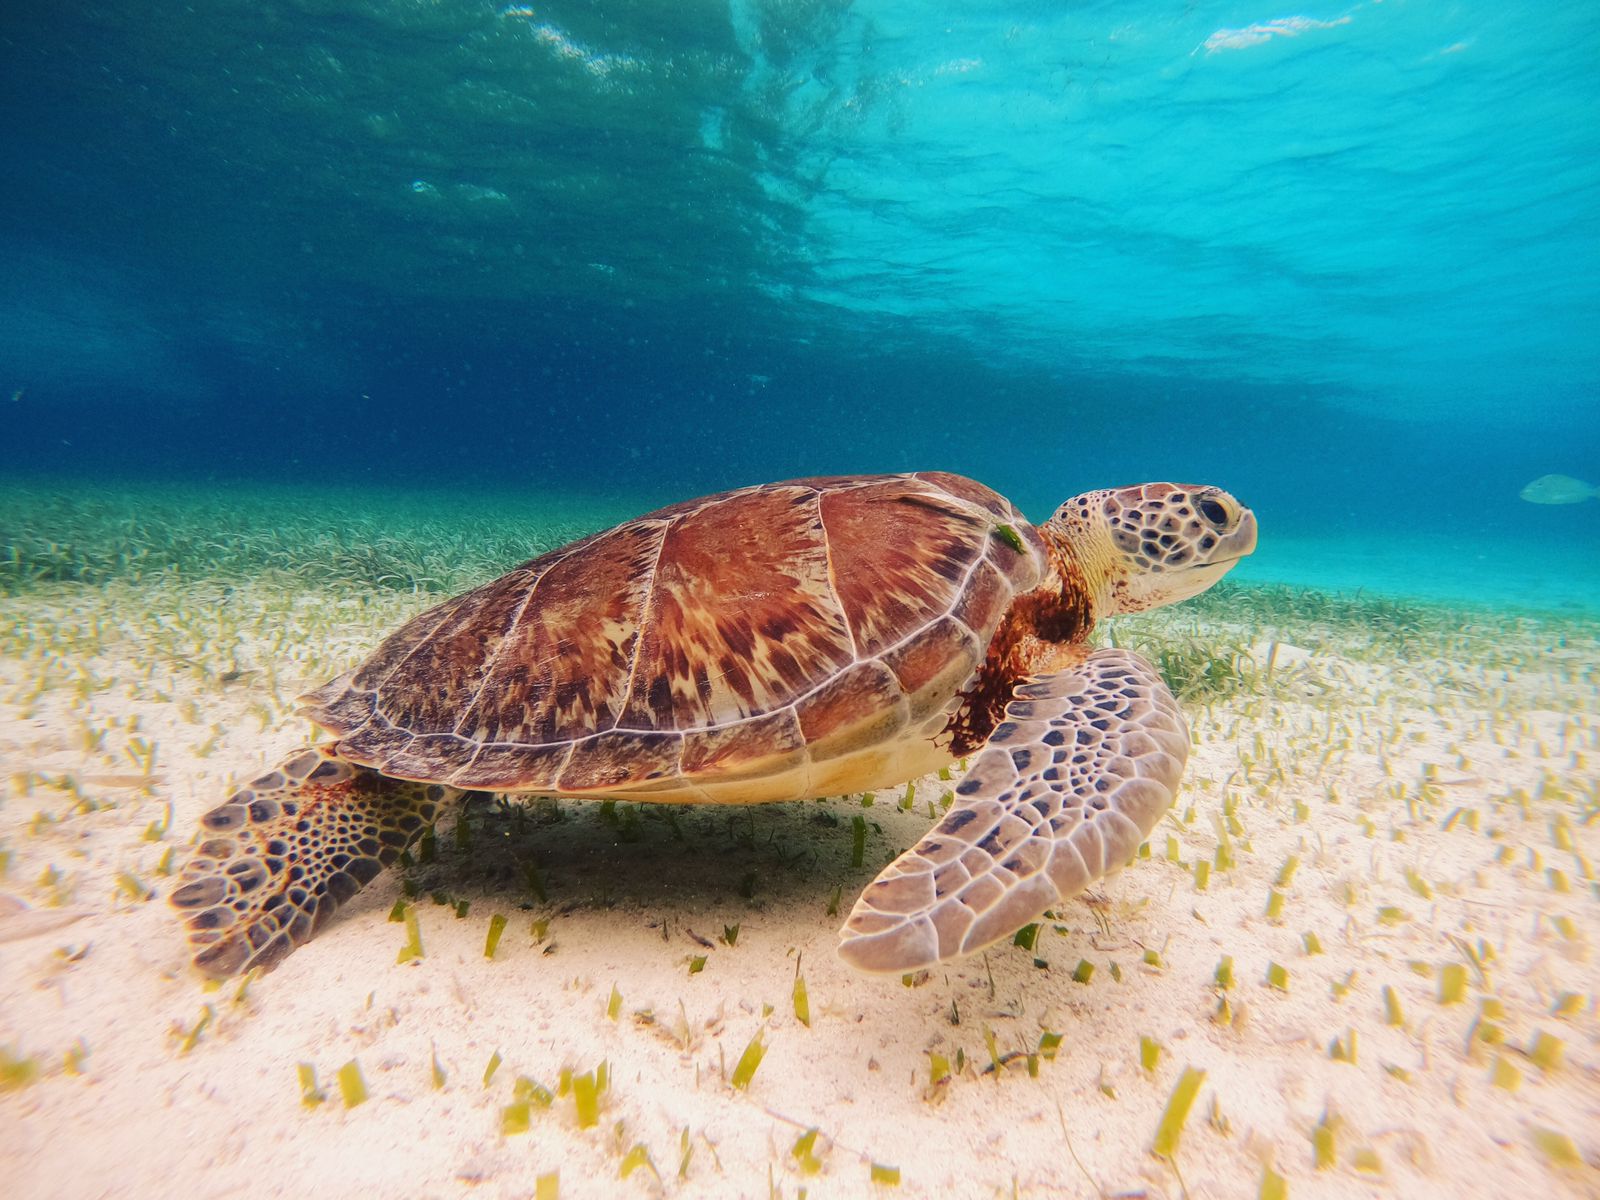 Captain Amado Watson's tour company, Caye Caulker Reef Friendly Tours, is very different from the average company you’ll find in Belize ecotourism. Learn more in Episode 70 of the For Animals For Earth show.